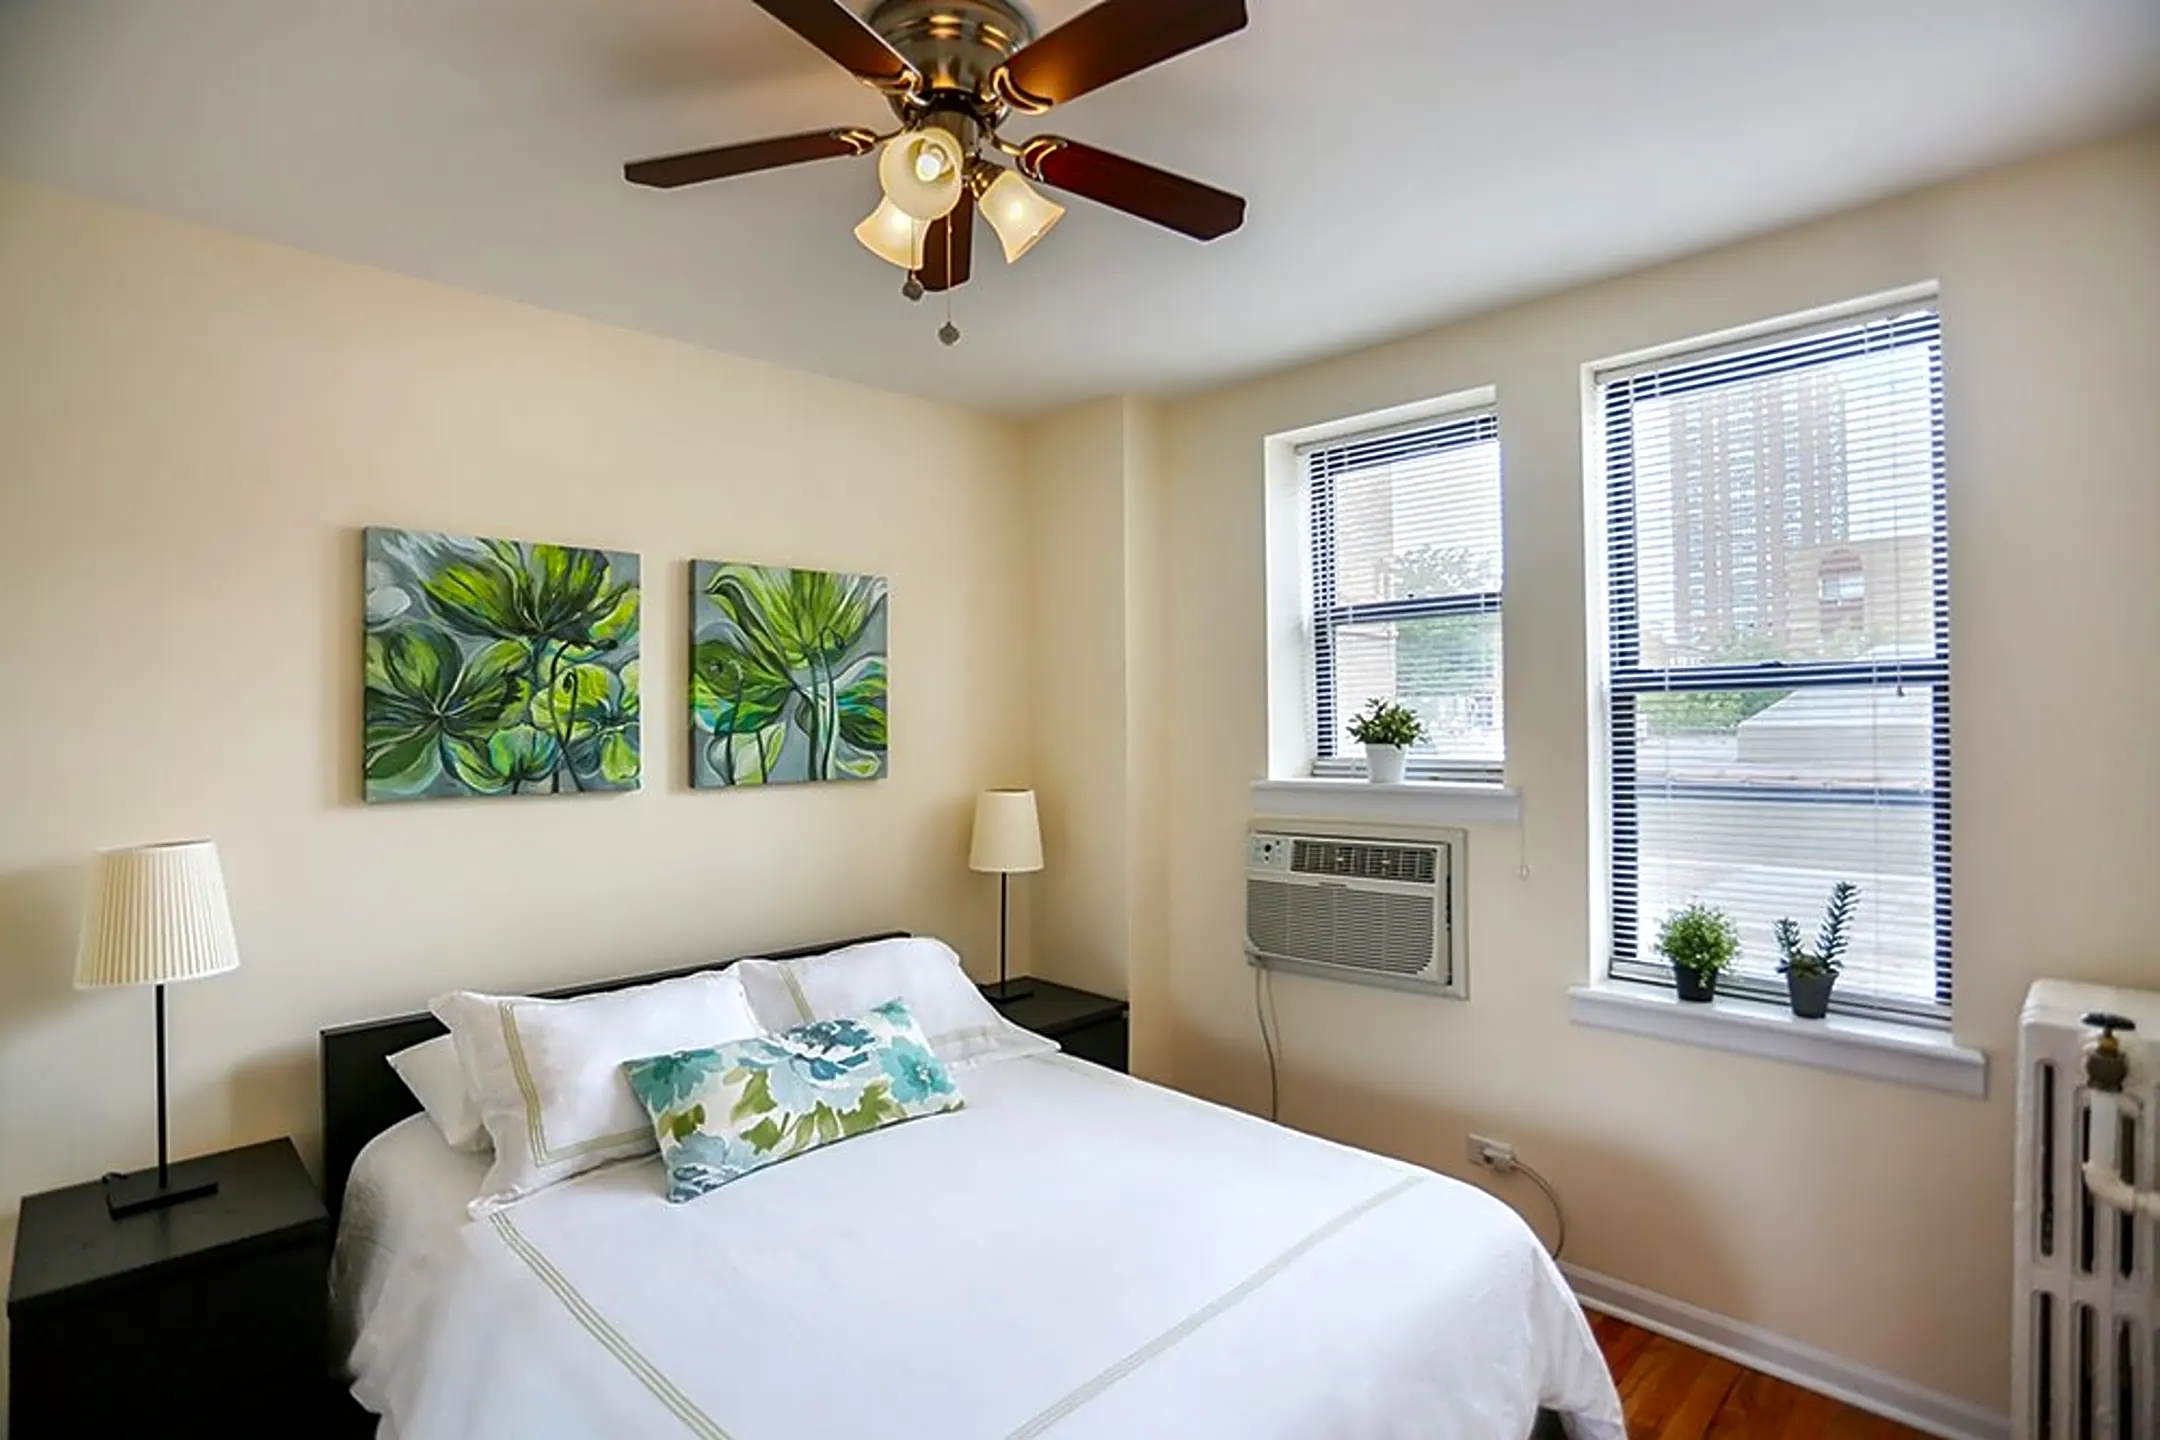 Bedroom - The Uptown Regency - Chicago, IL